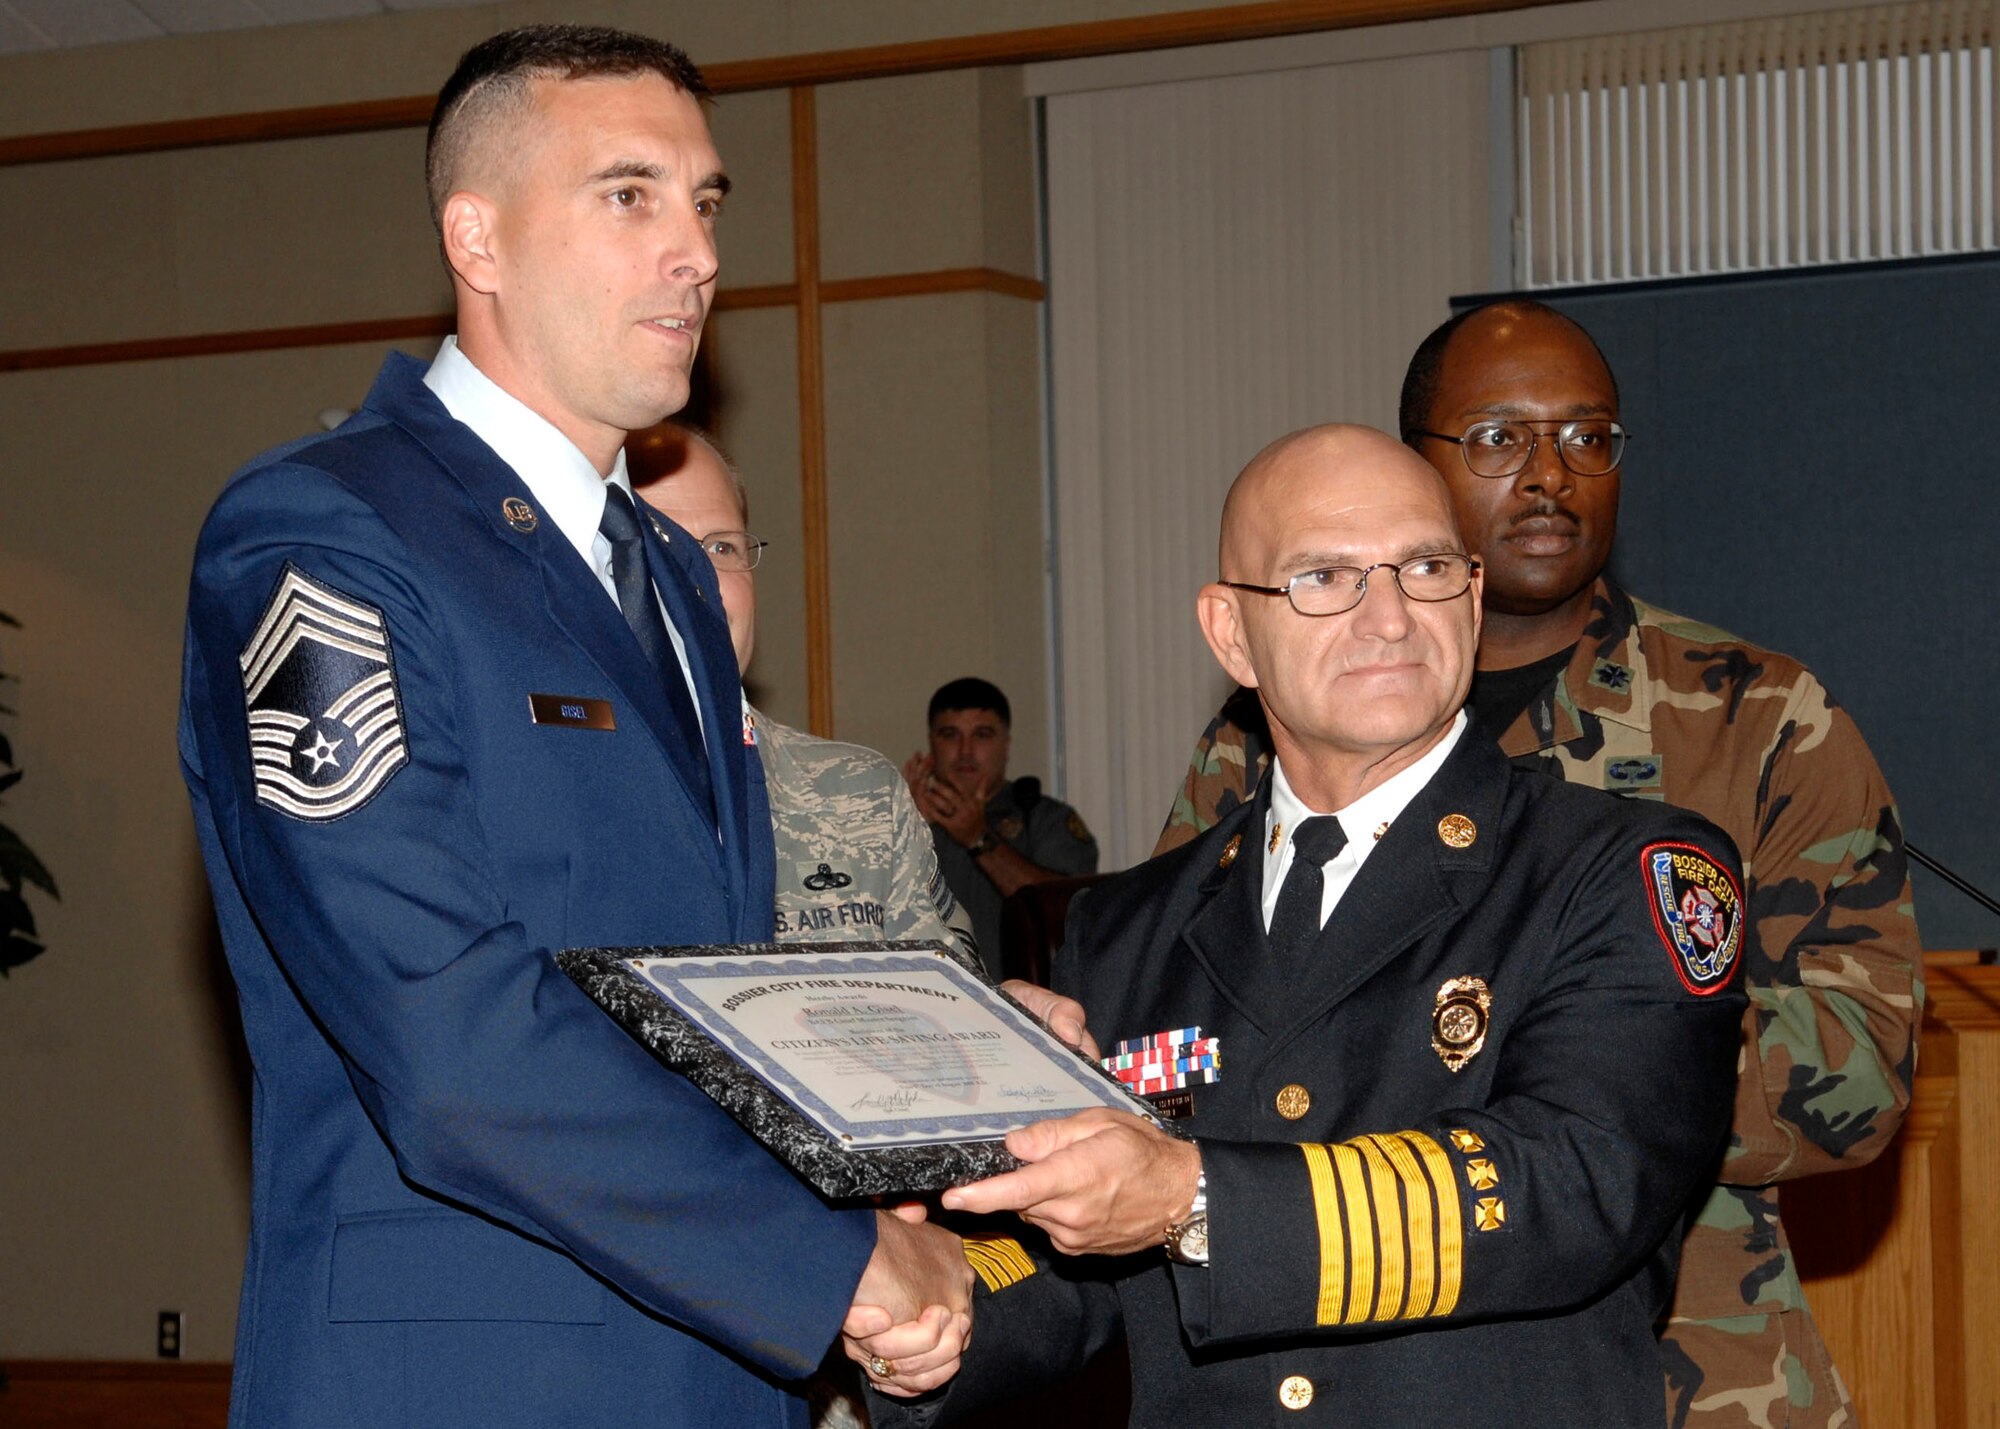 BARKSDALE AIR FORCE BASE, La -- Chief Master Sgt. Ronald Gisel, 2d Communications Squadron, was awarded Bossier City Fire Department's Citizen's Lifesaving Award by Fire Chief Sammy Halphen for his heroic acts during a city council meeting Tuesday. (U.S. Air Force photo by Airman 1st Class Brittany Y.Bateman)(RELEASED) 